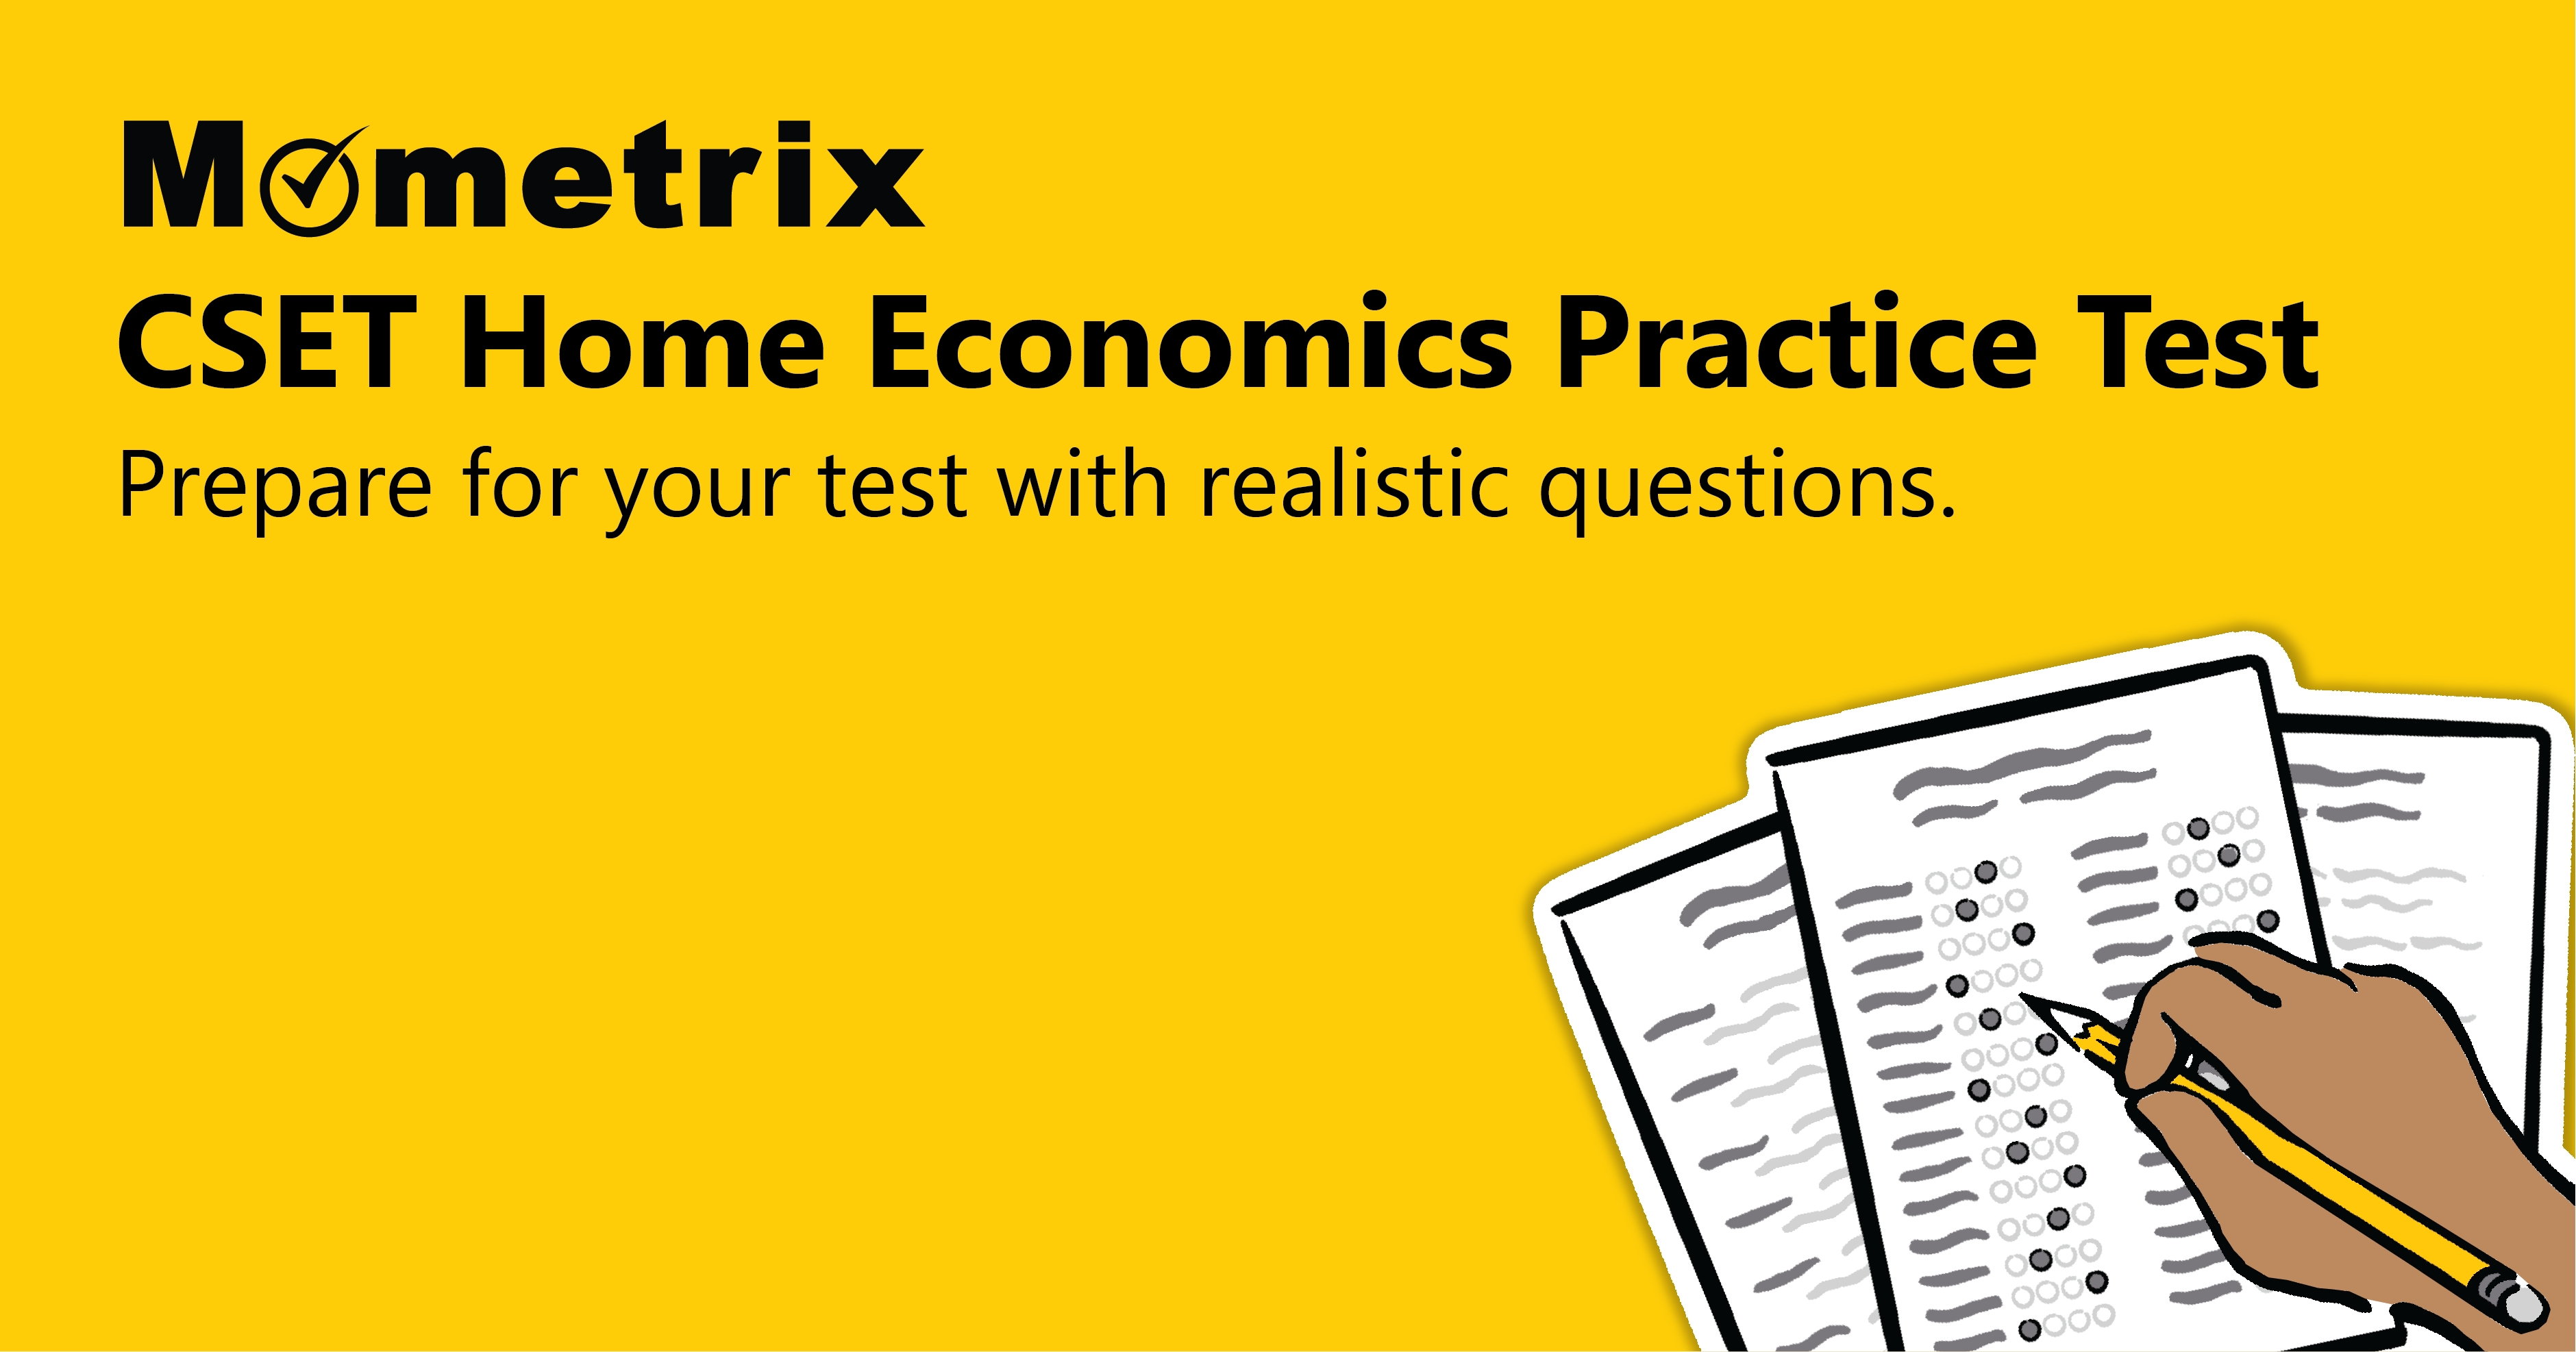 Yellow banner with the text "Mometrix CSET Home Economics Practice Test" instructing to prepare using realistic questions. Illustrated hand fills out a multiple-choice test on sheets of paper.